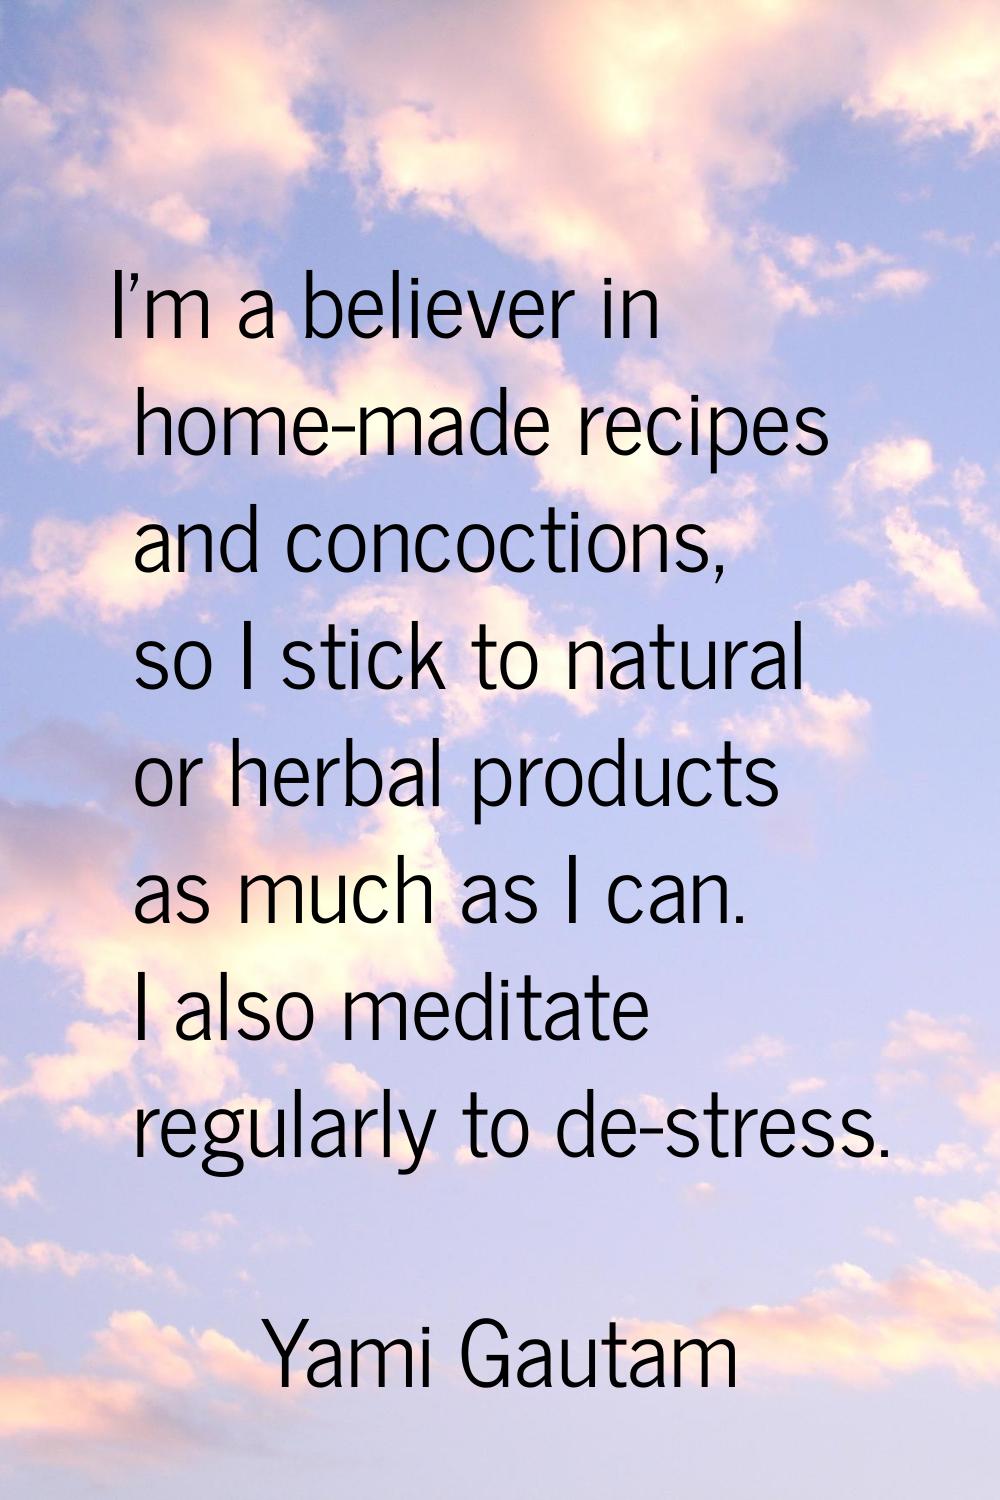 I'm a believer in home-made recipes and concoctions, so I stick to natural or herbal products as mu